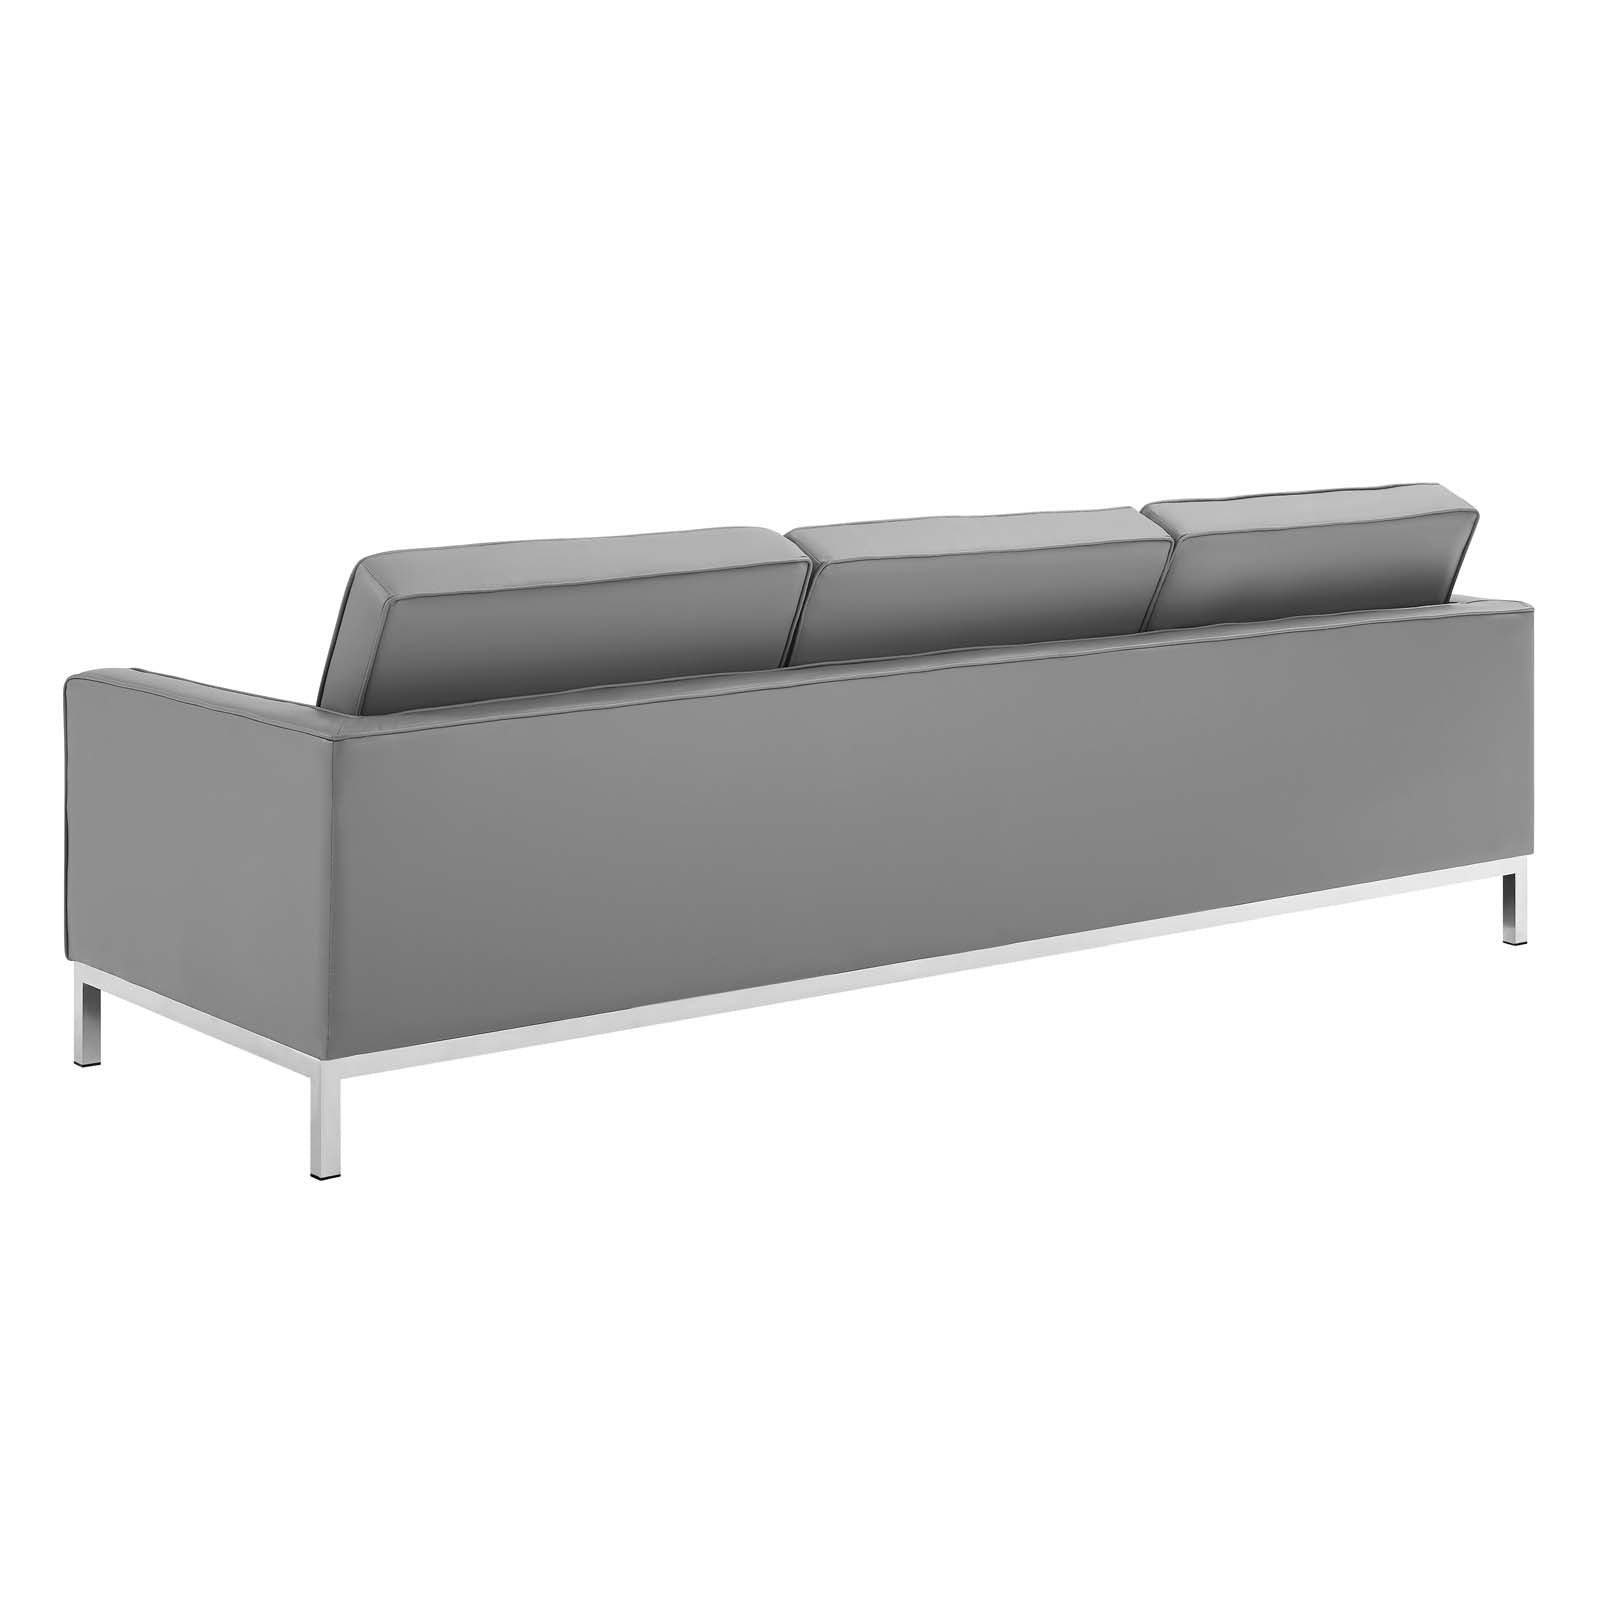 Modway Sofas & Couches - Loft Tufted Upholstered Faux Leather Sofa Silver Gray